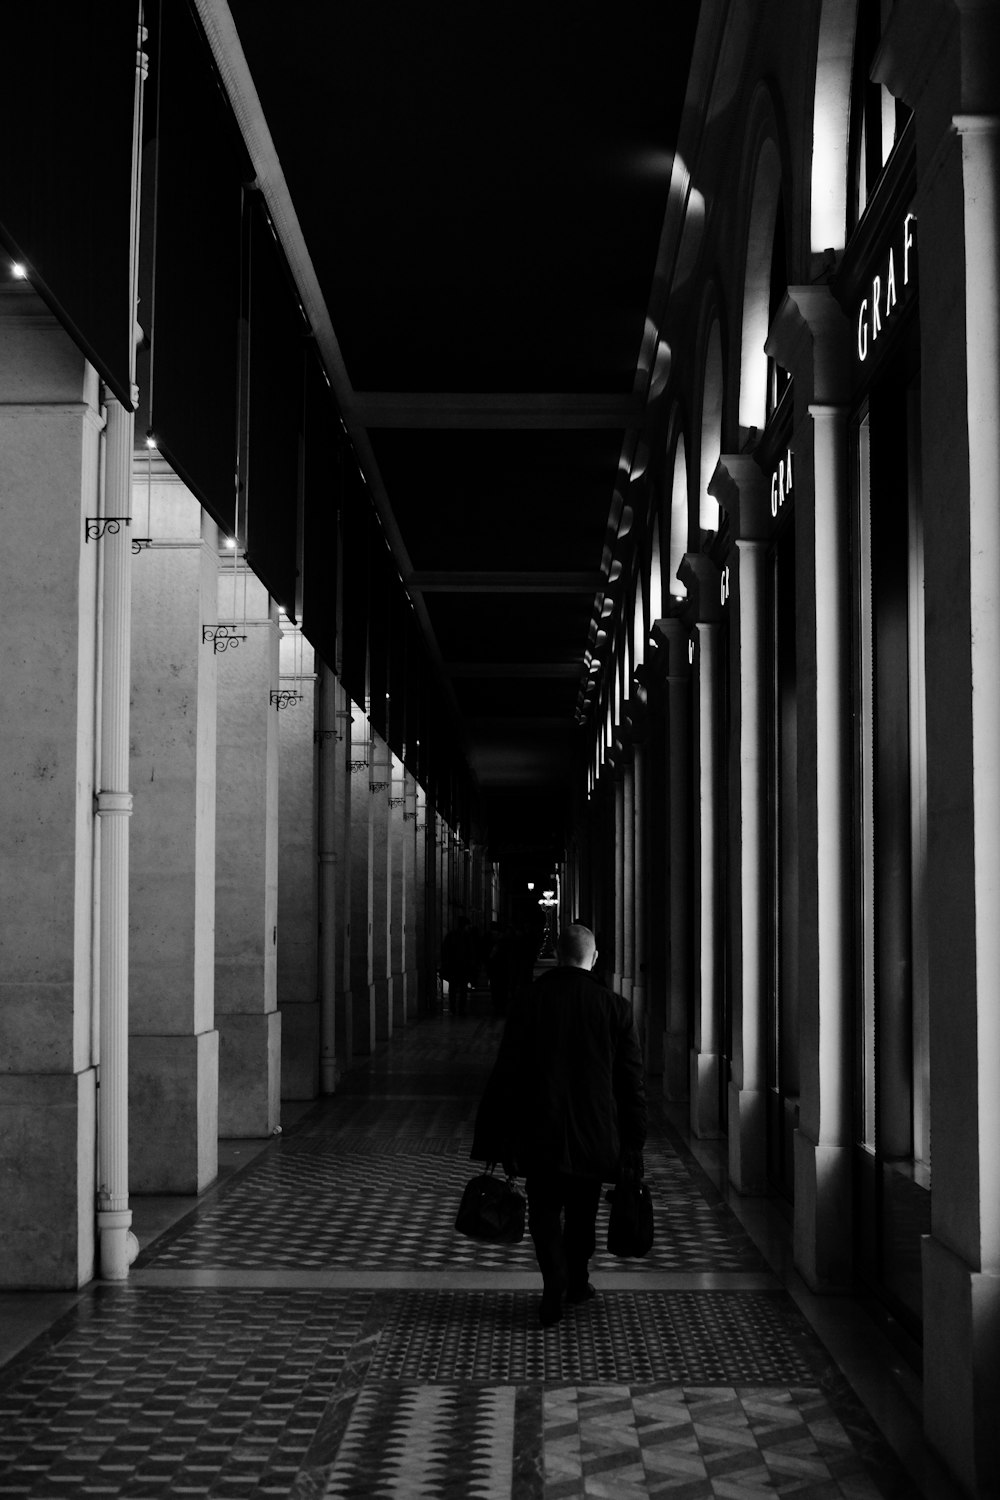 a black and white photo of a person walking down a hallway